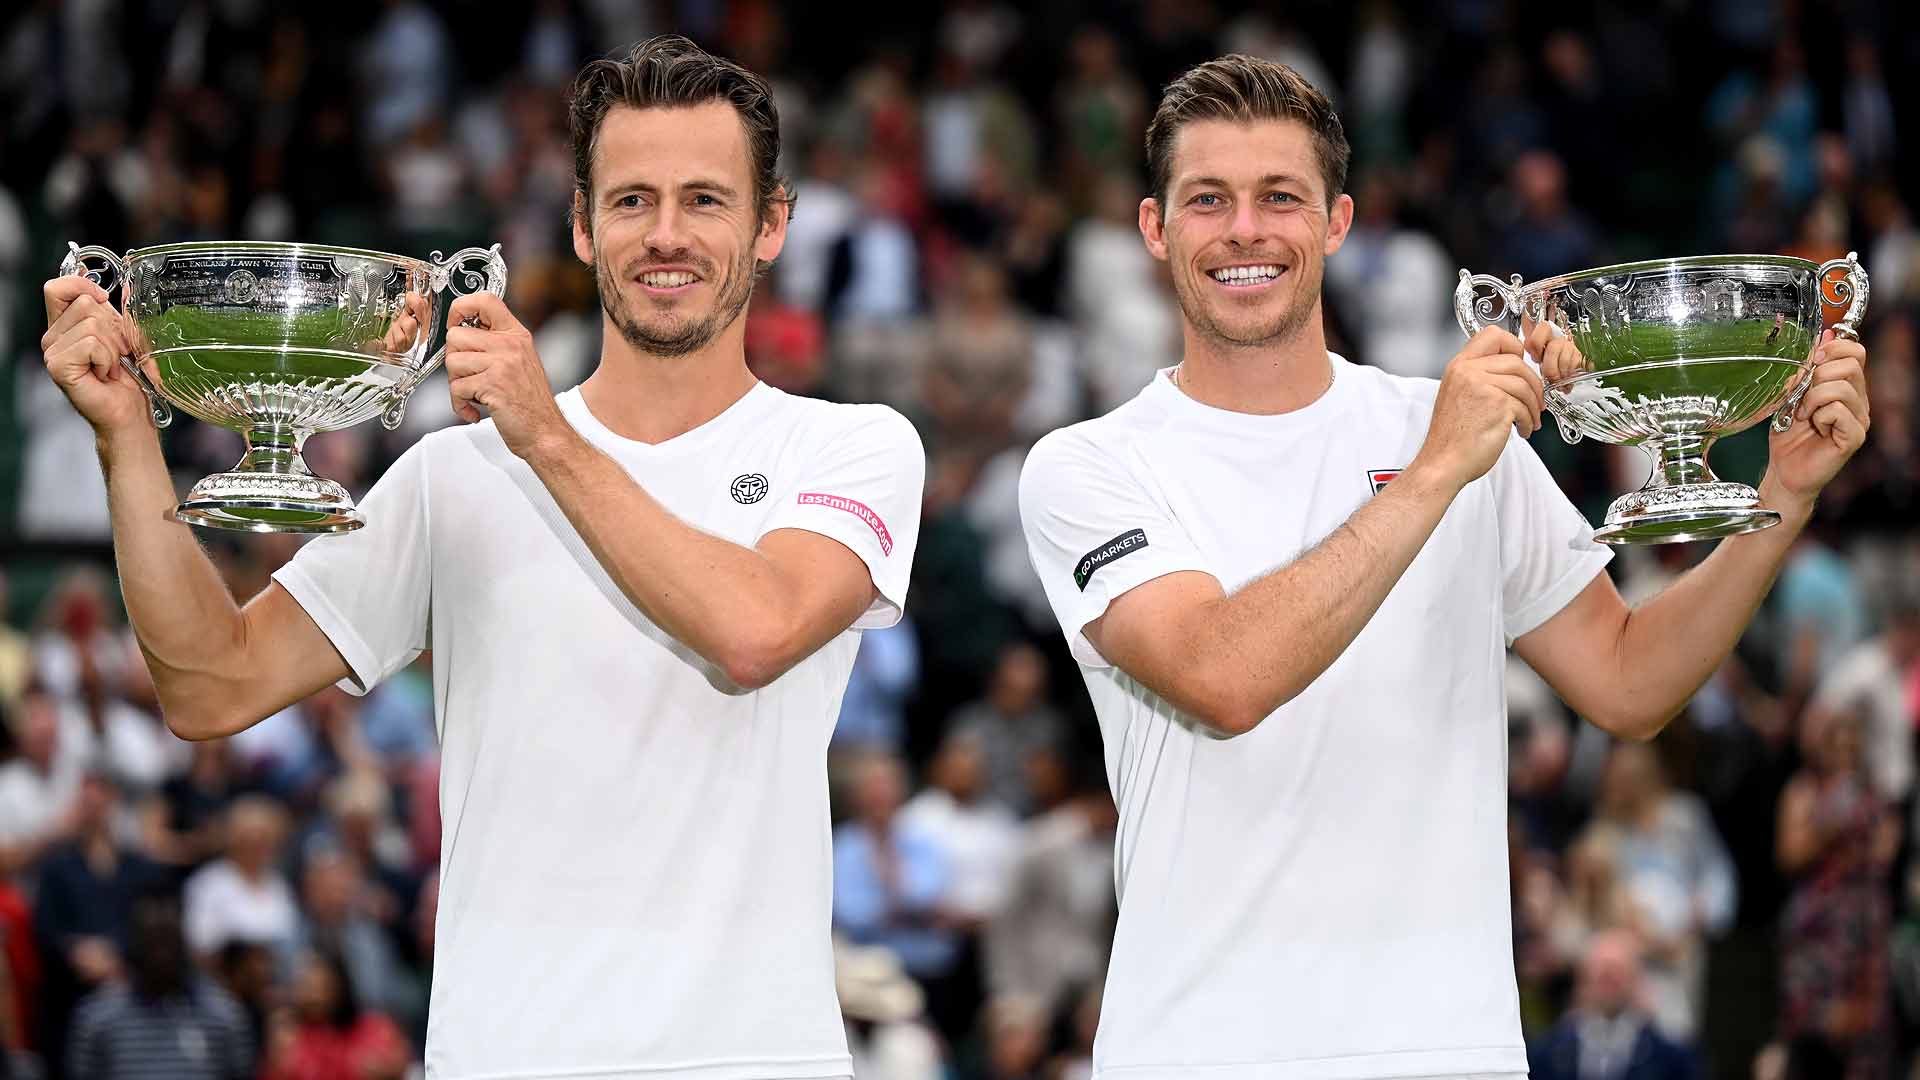 Wesley Koolhof and Neal Skupski lift their maiden major men's doubles trophy after triumphing on Saturday at Wimbledon.